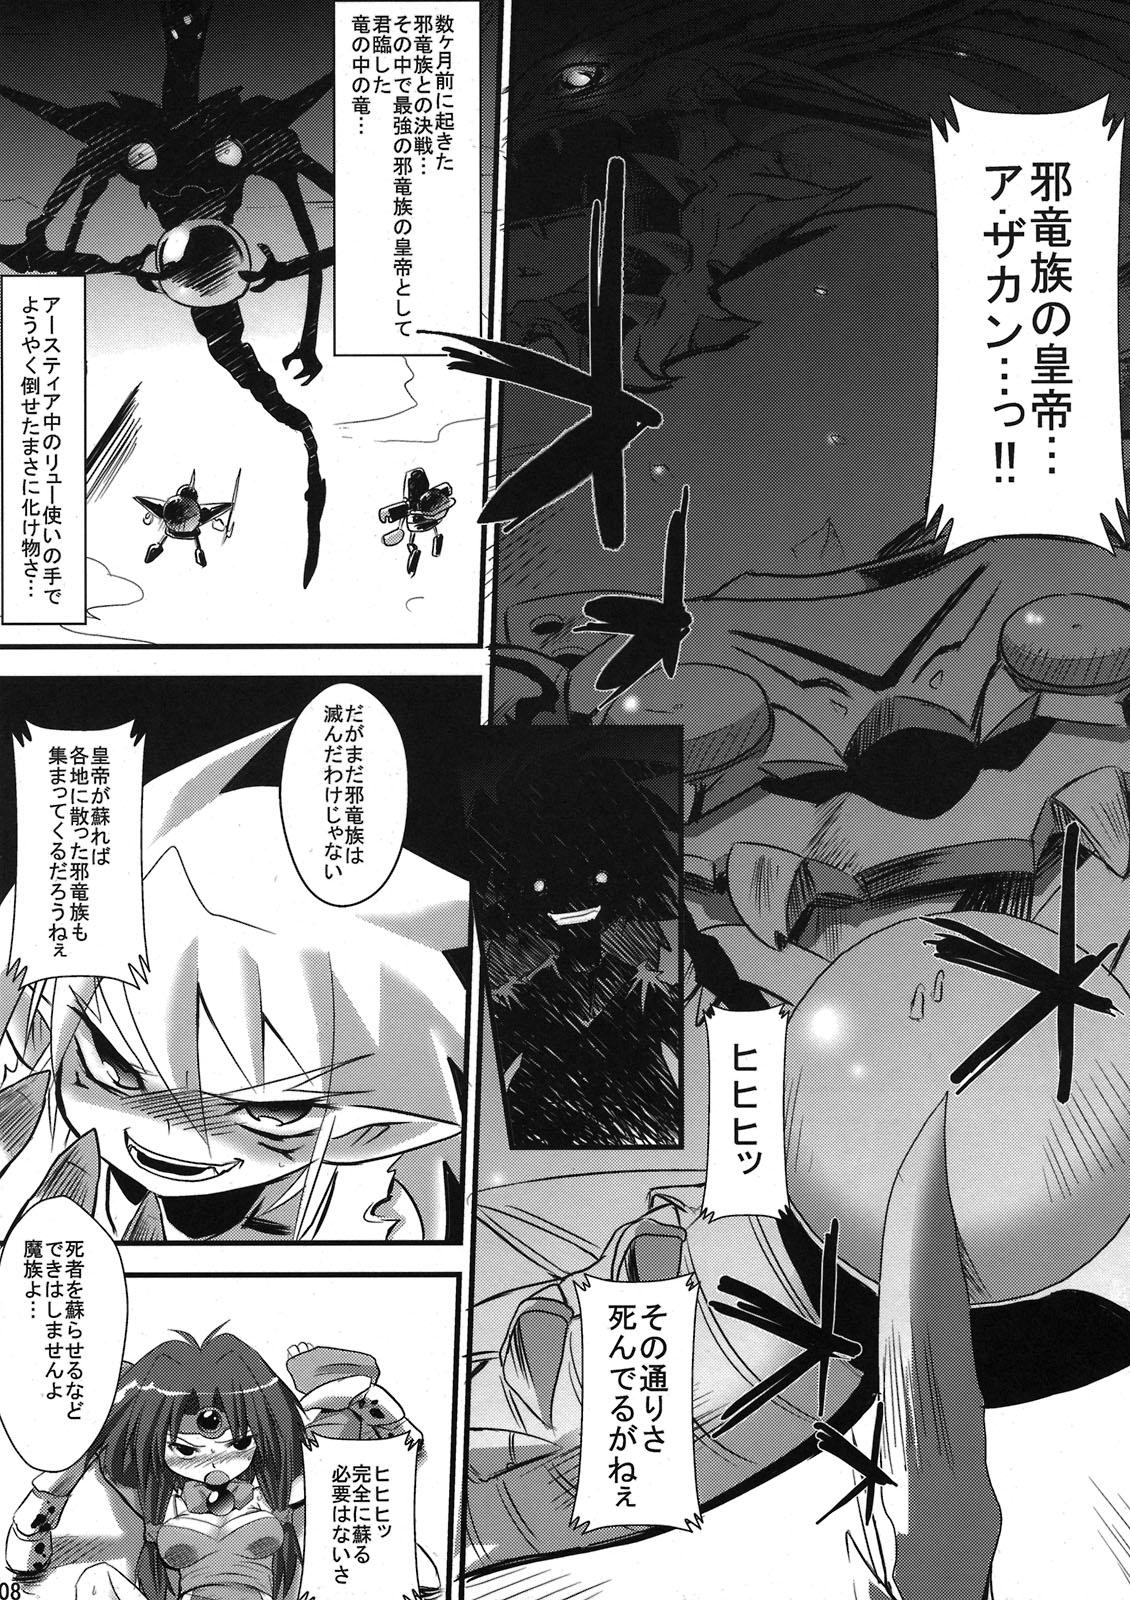 Money Toraware no Madouhime Joukan - Lord of lords ryu knight Hairy - Page 8